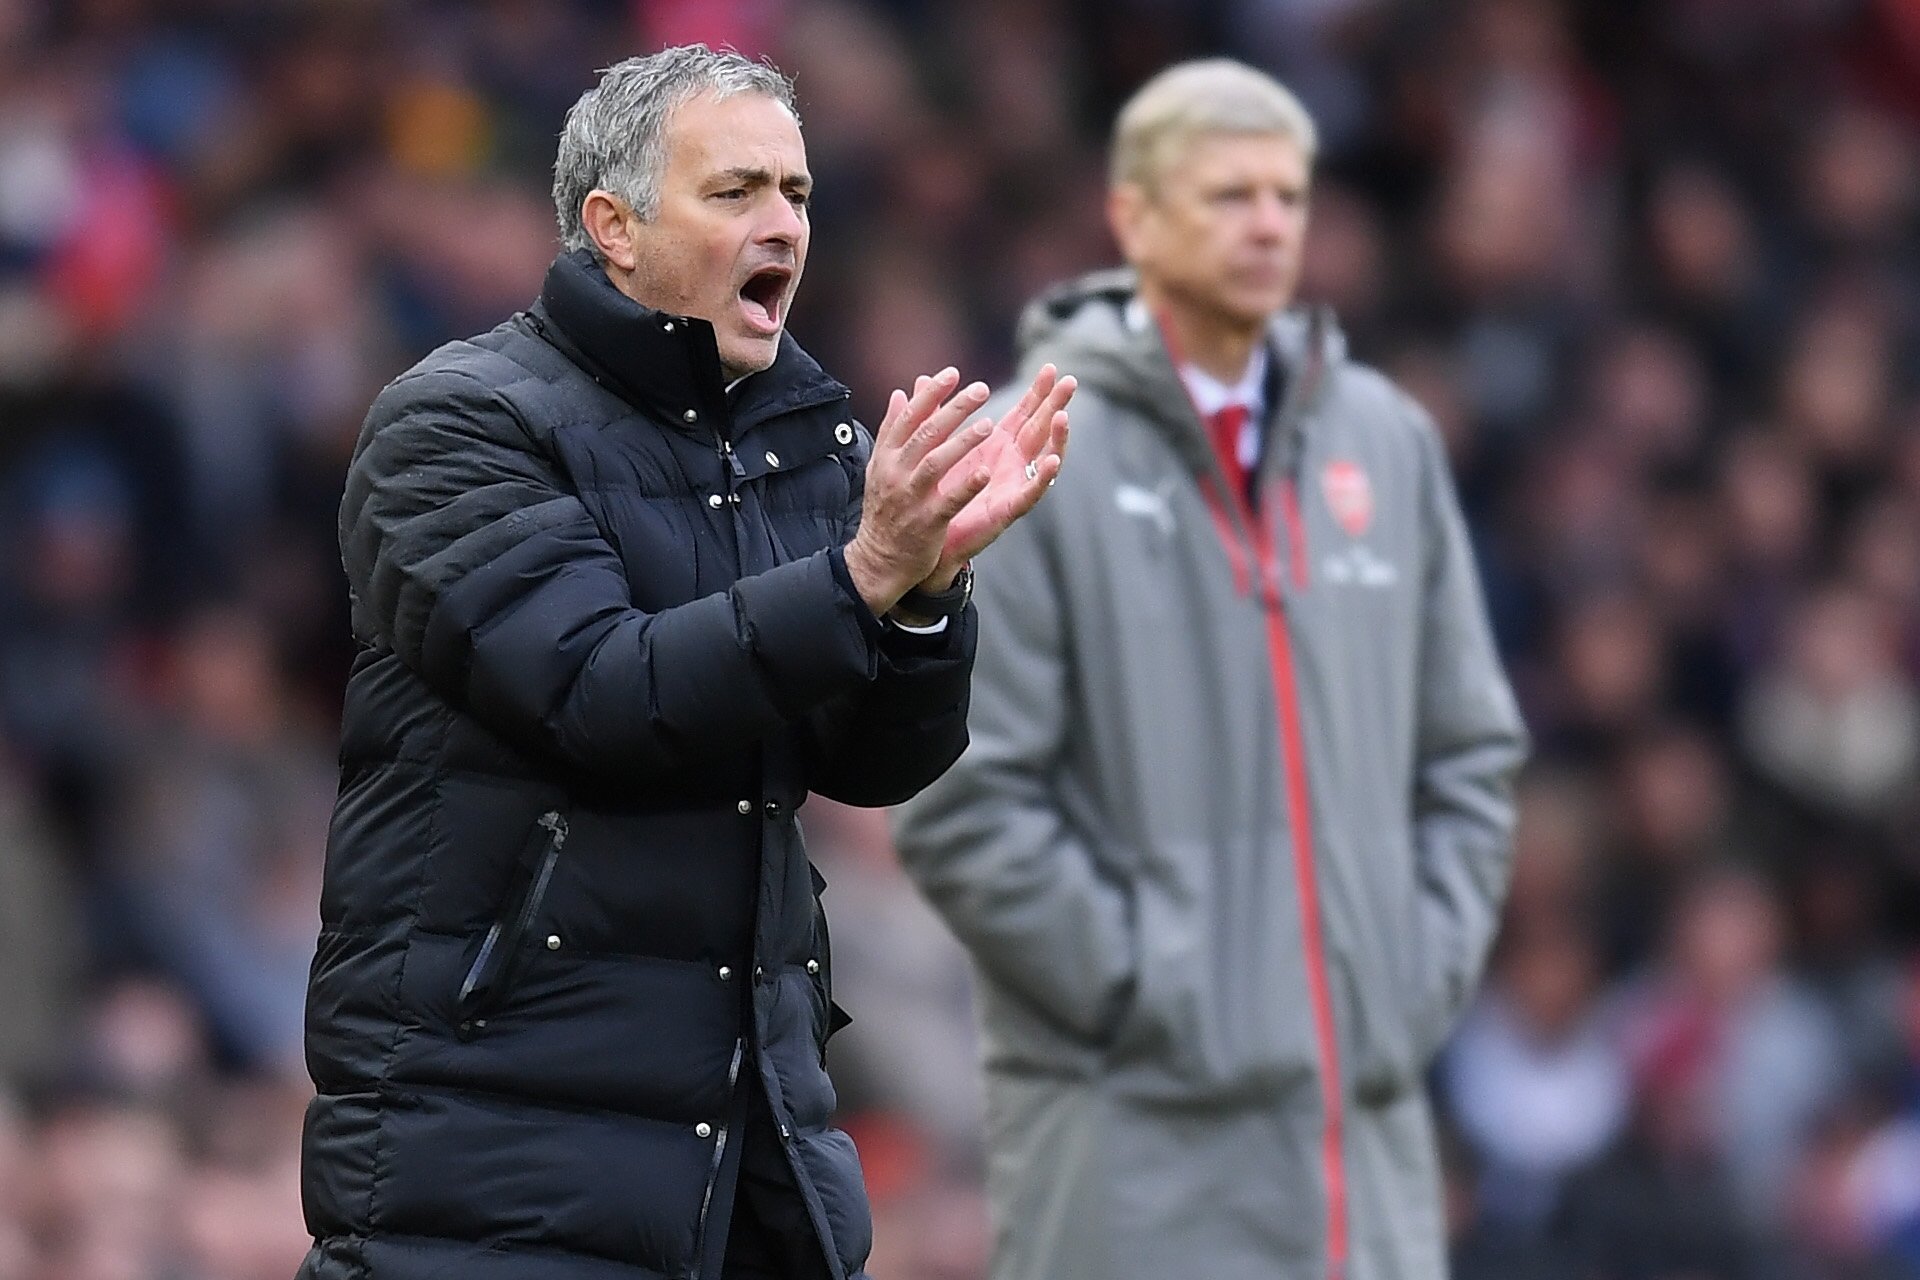 MANCHESTER, ENGLAND - NOVEMBER 19: Jose Mourinho, Manager of Manchester United gives his team instructions during the Premier League match between Manchester United and Arsenal at Old Trafford on November 19, 2016 in Manchester, England.  (Photo by Michael Regan/Getty Images)